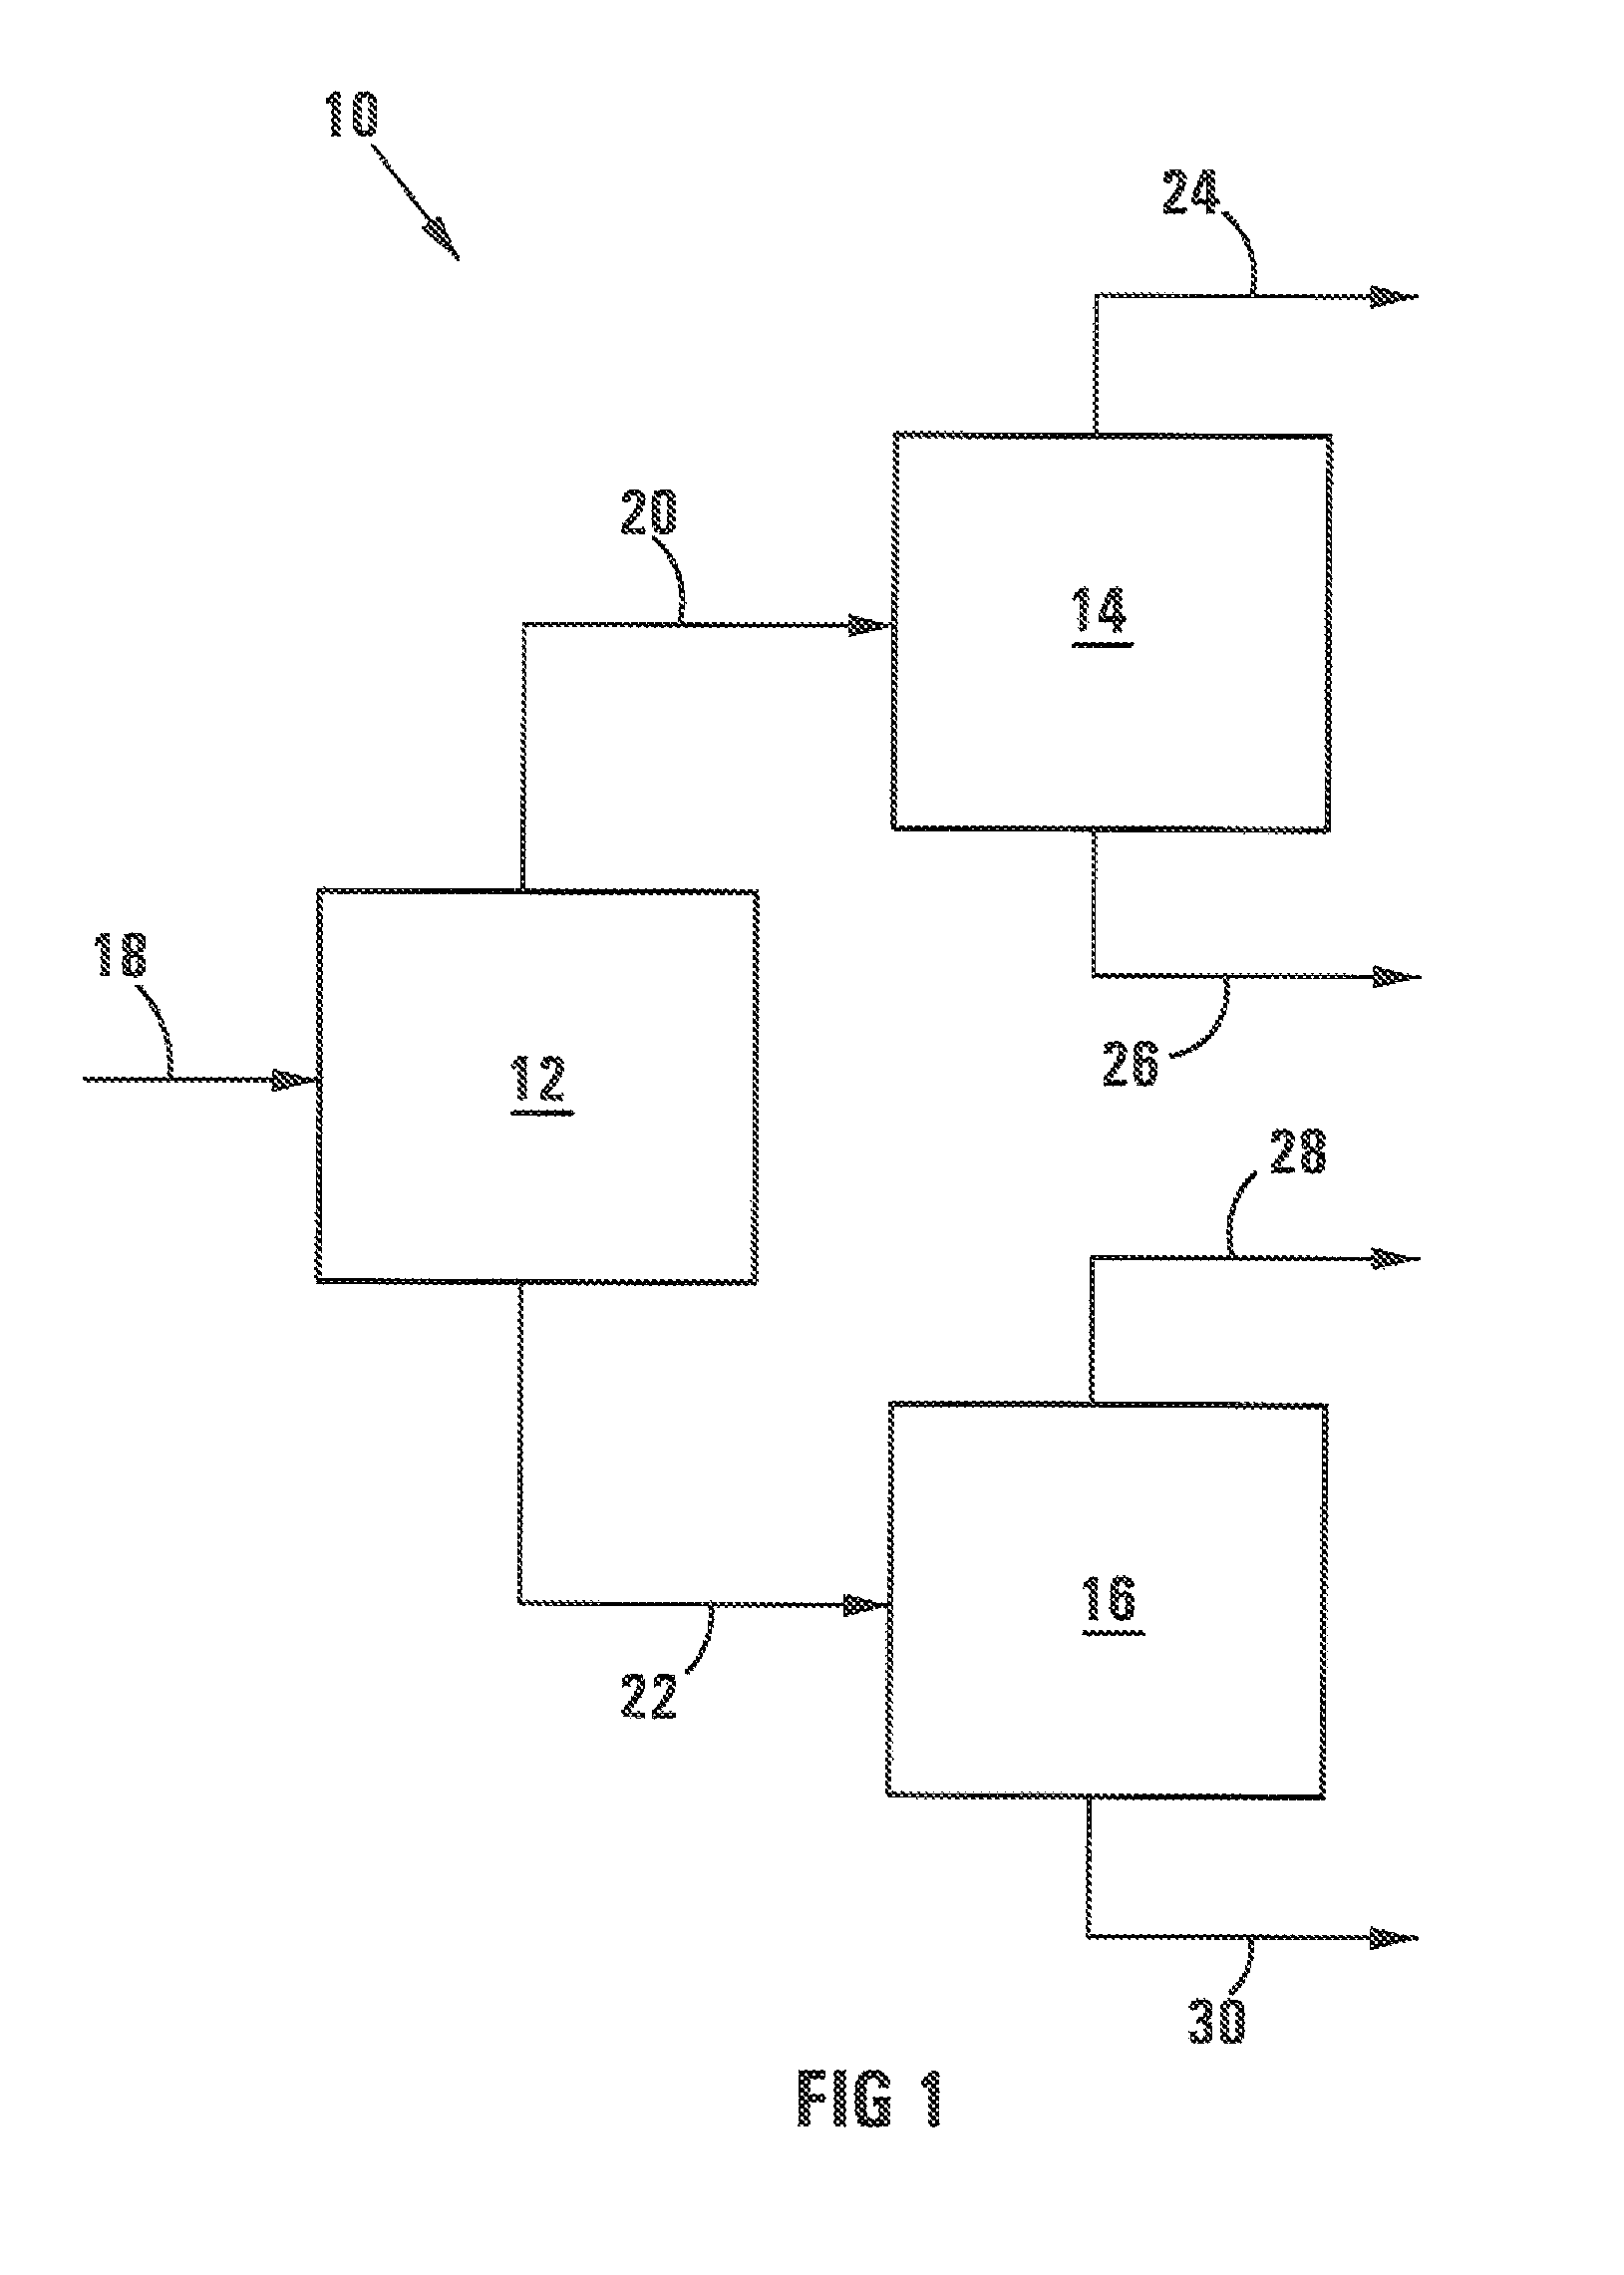 Coal processing operation comprising a dense media separation stage to separate a coal feedstock into lower and higher ash coal streams